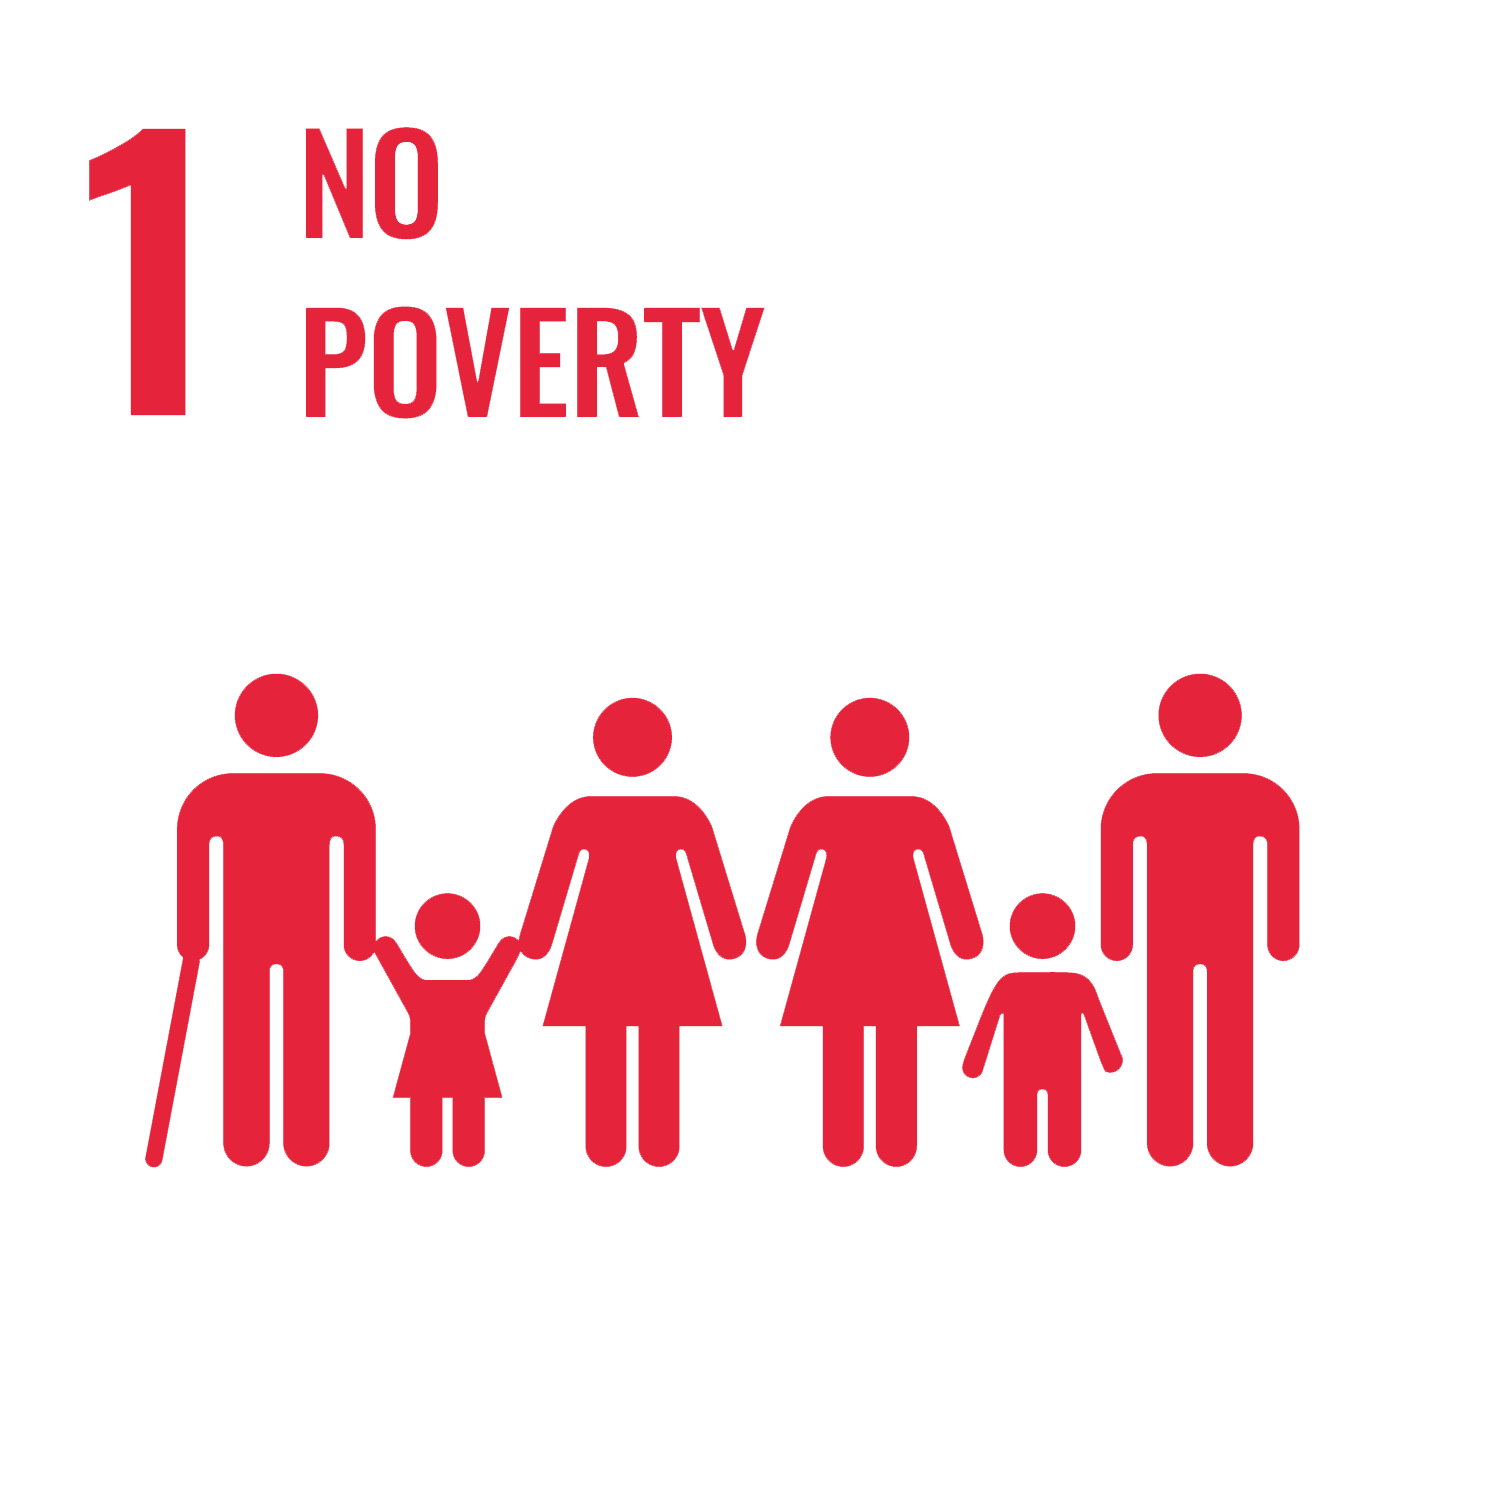 United Nations Goal #1 No Poverty